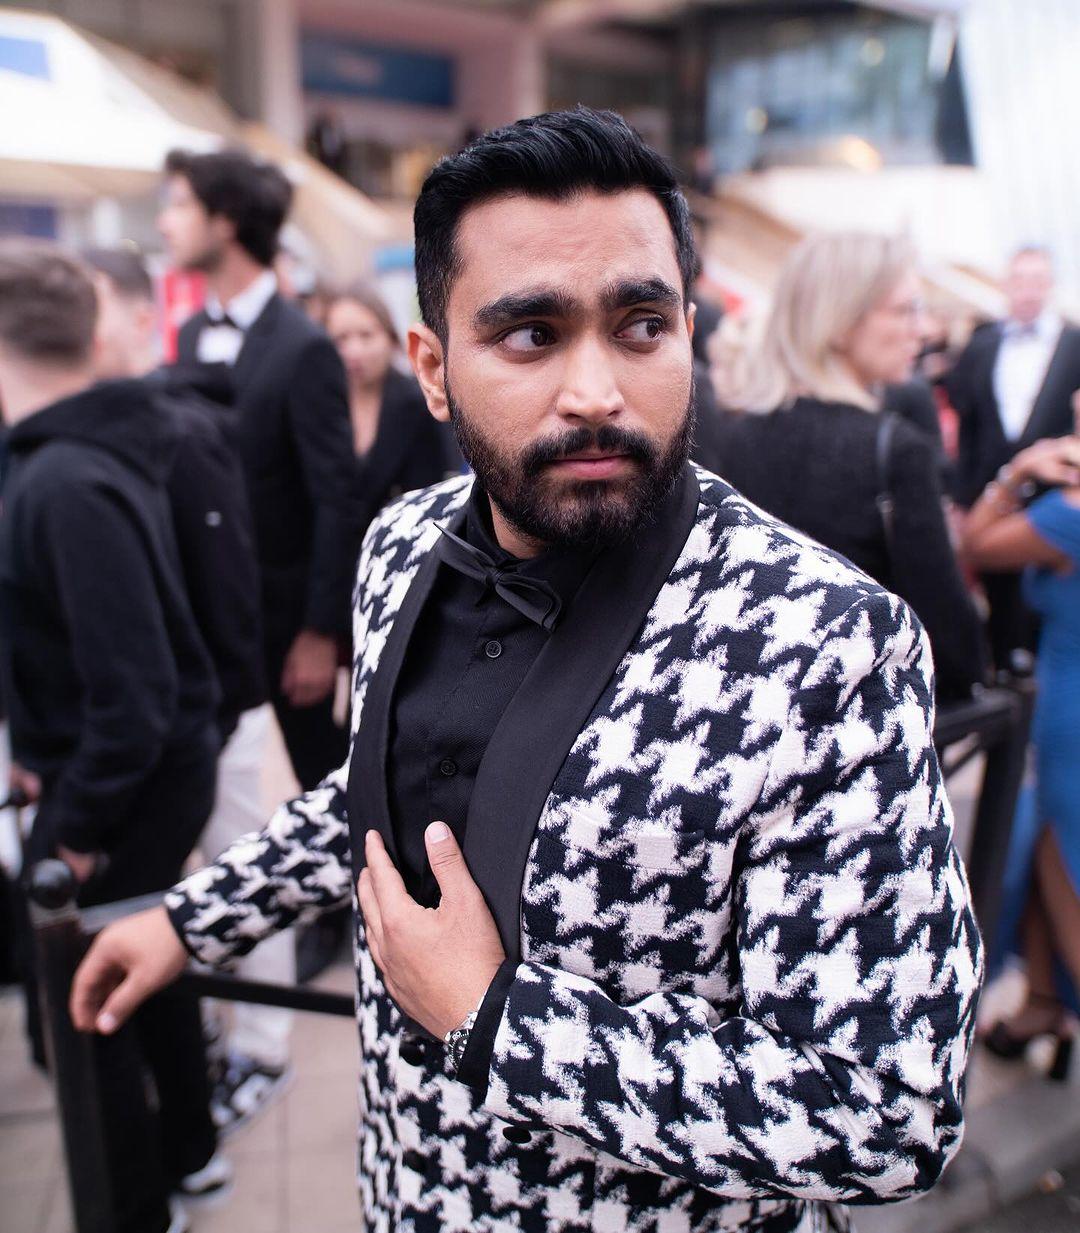 Viraj's outfit, styled by the talented Saloni Parekh, was both fashionable and eye-catching. The intricate patterns on his jacket highlighted his impeccable style, complemented by a stylish black bow tie and a sleek black shirt.